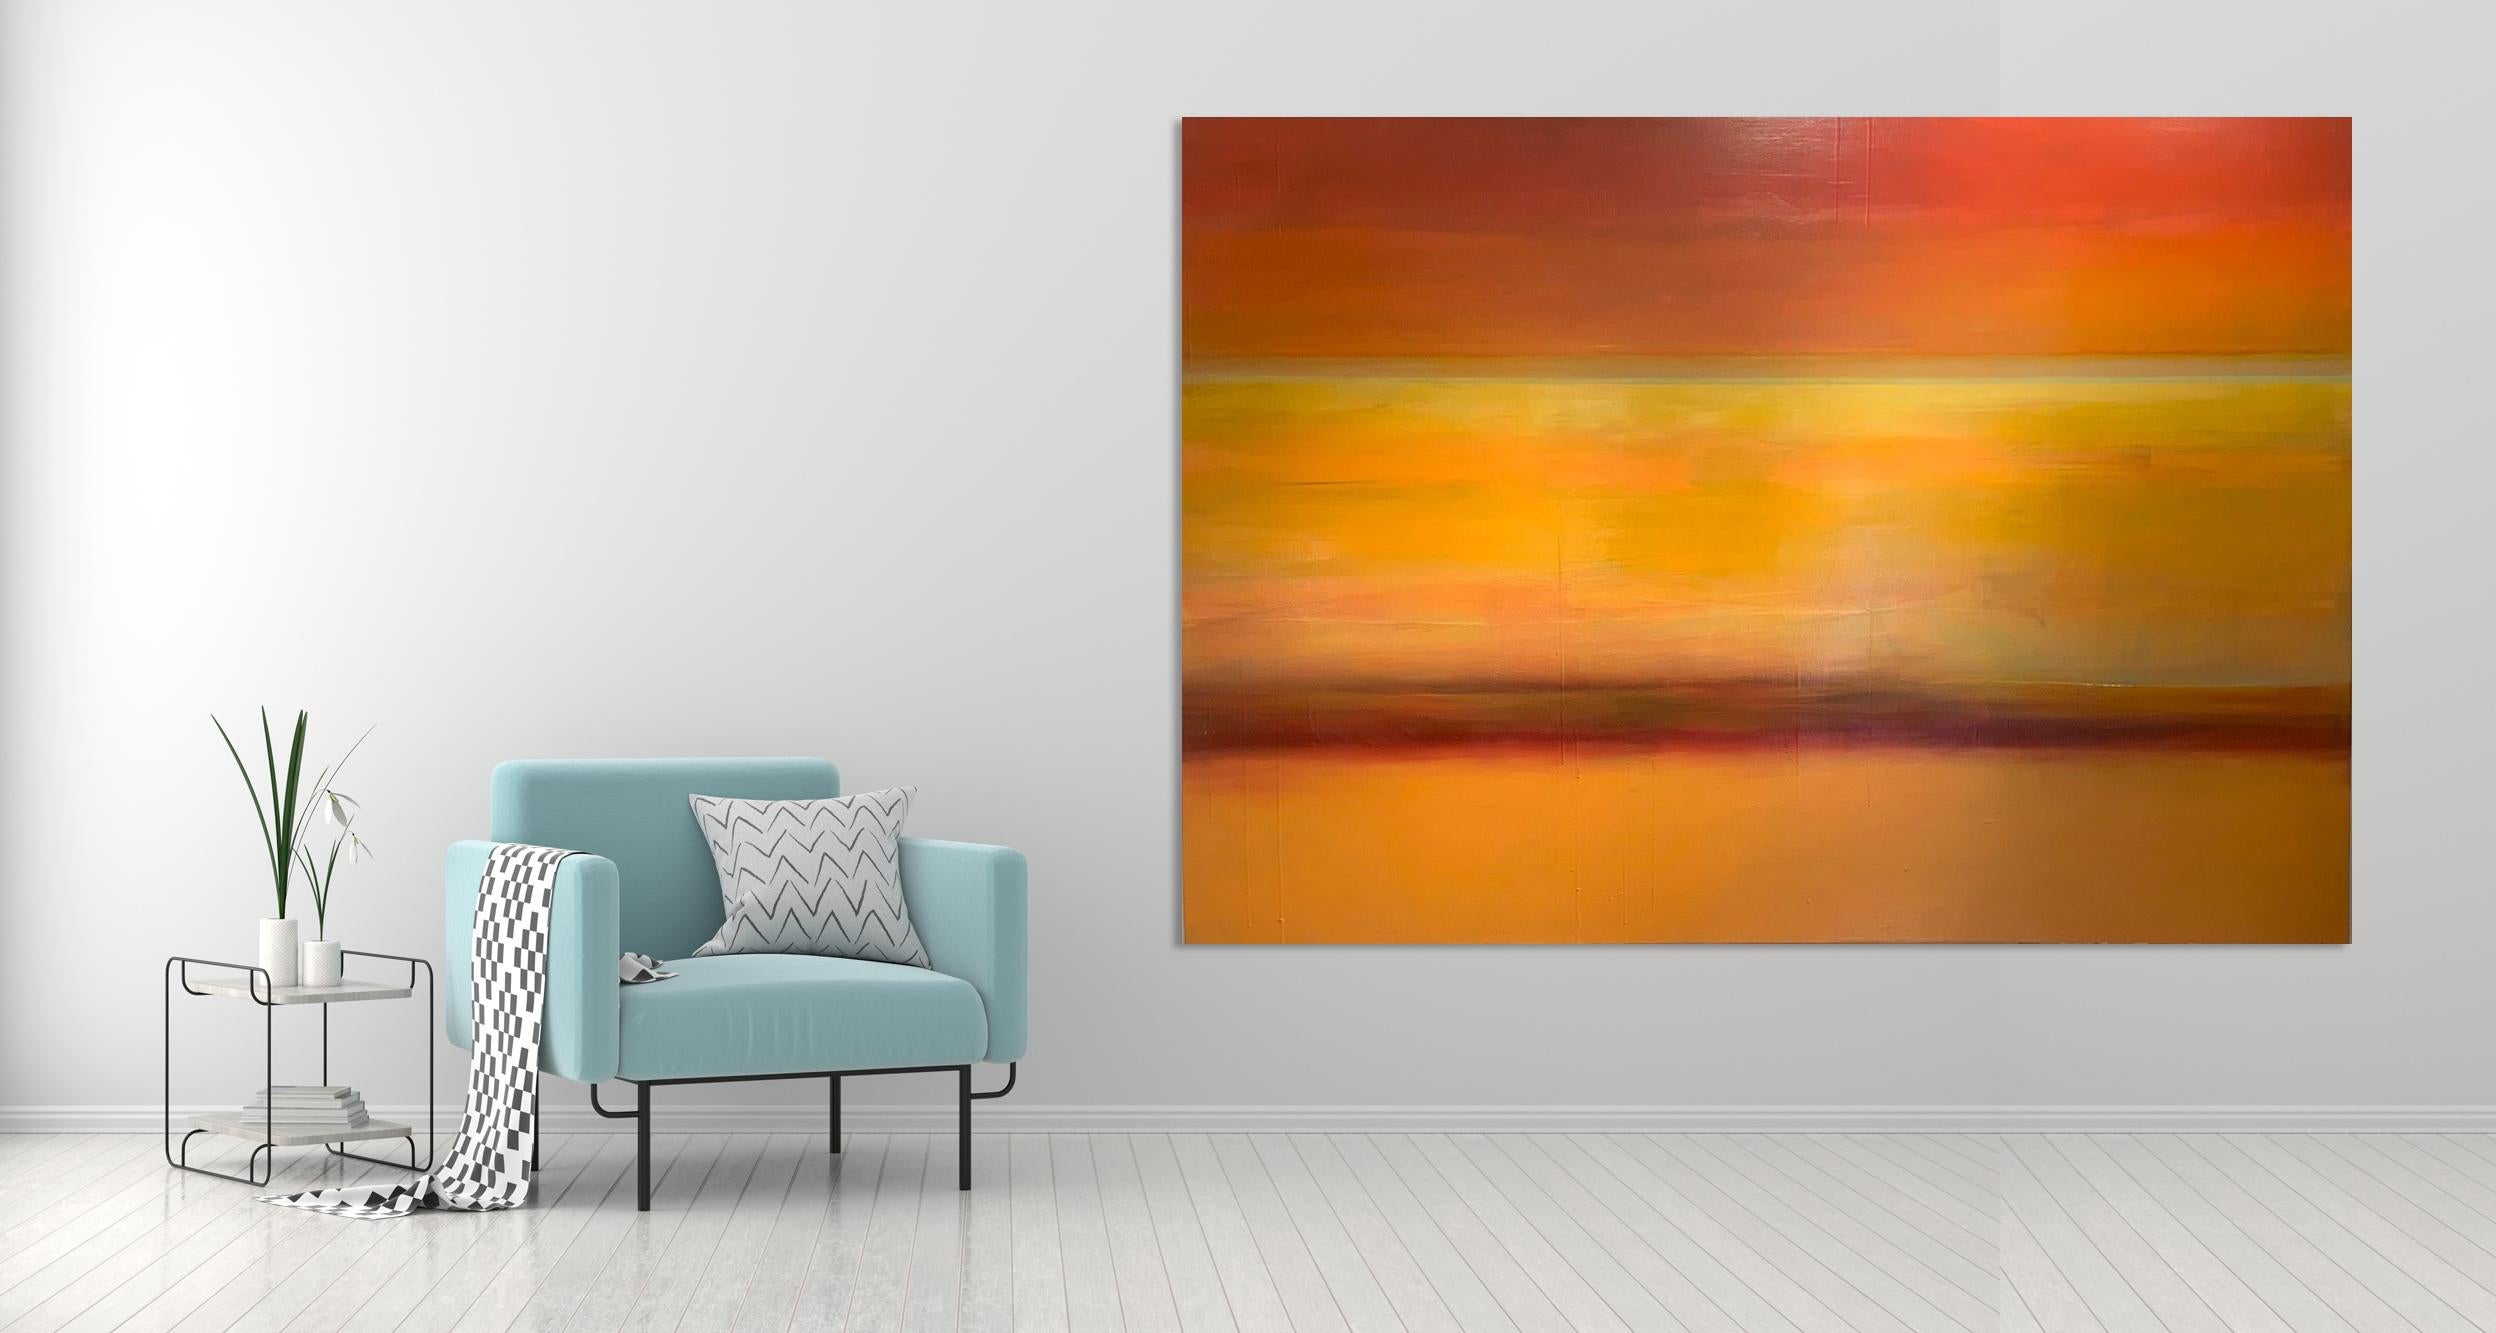 'Sunset over the Ocean' Contemporary Abstract Seascape O/C - Painting by Katheryn Holt